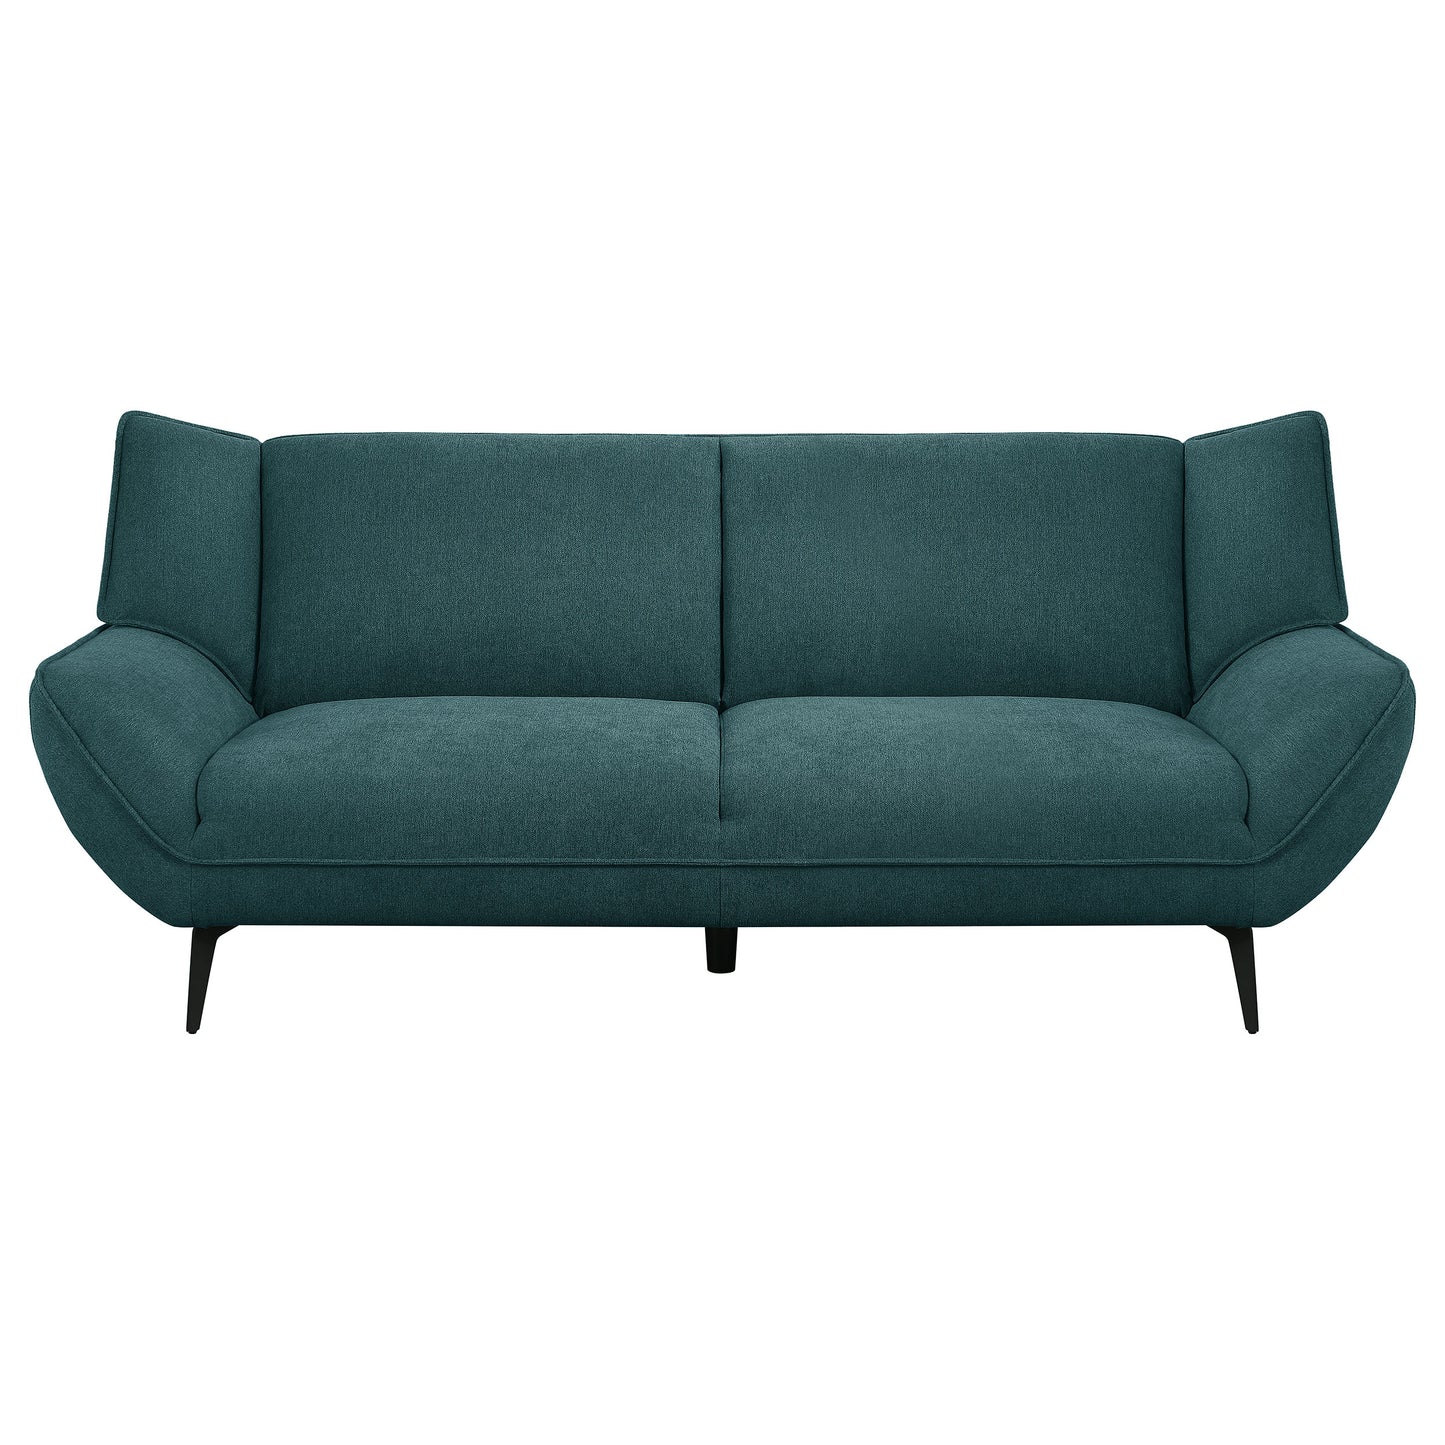 Acton 2-piece Upholstered Flared Arm Sofa Set Teal Blue